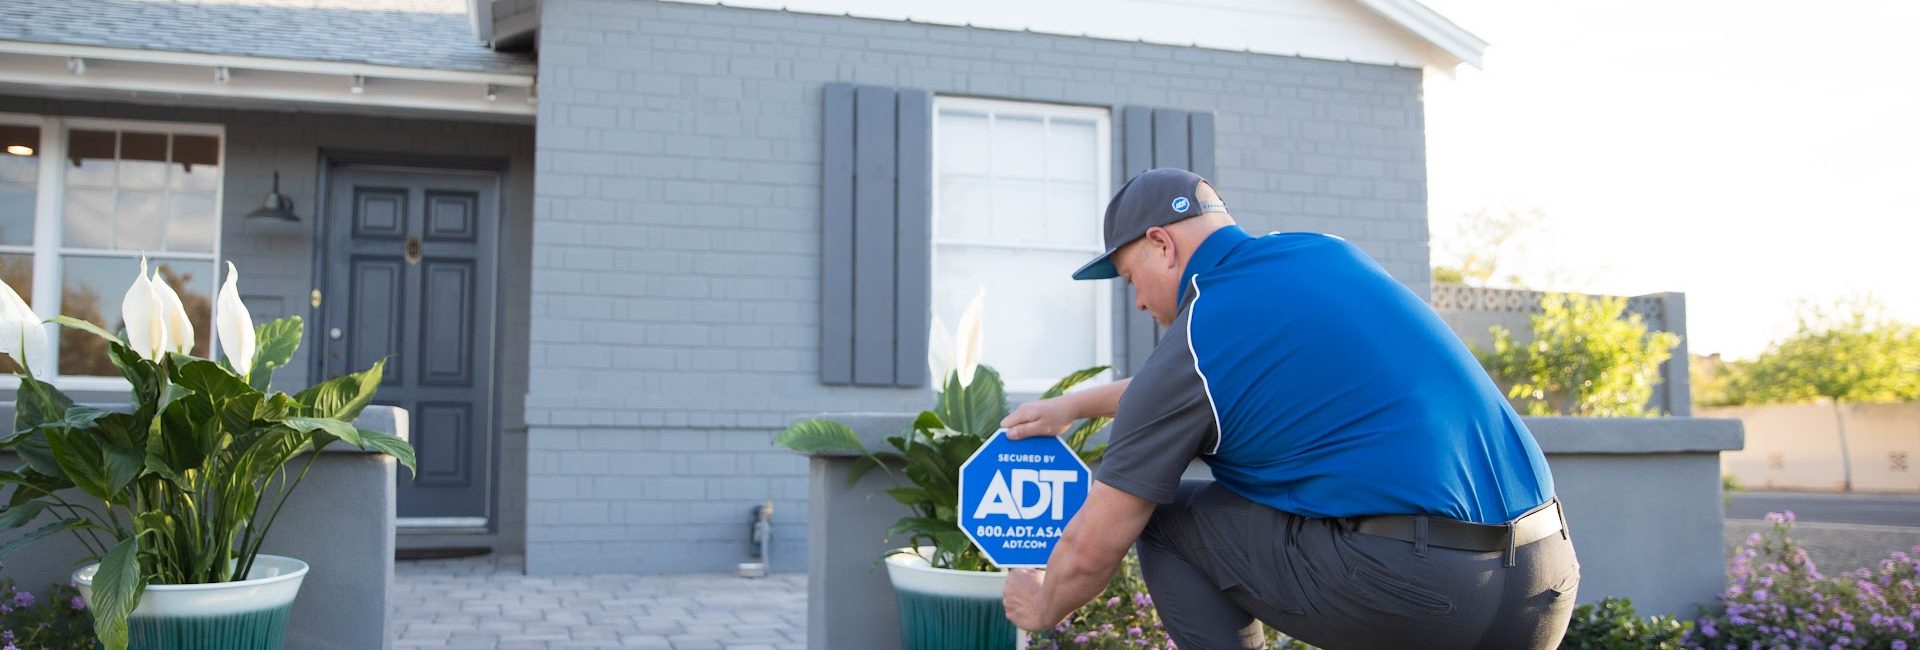 ADT Security Services 6